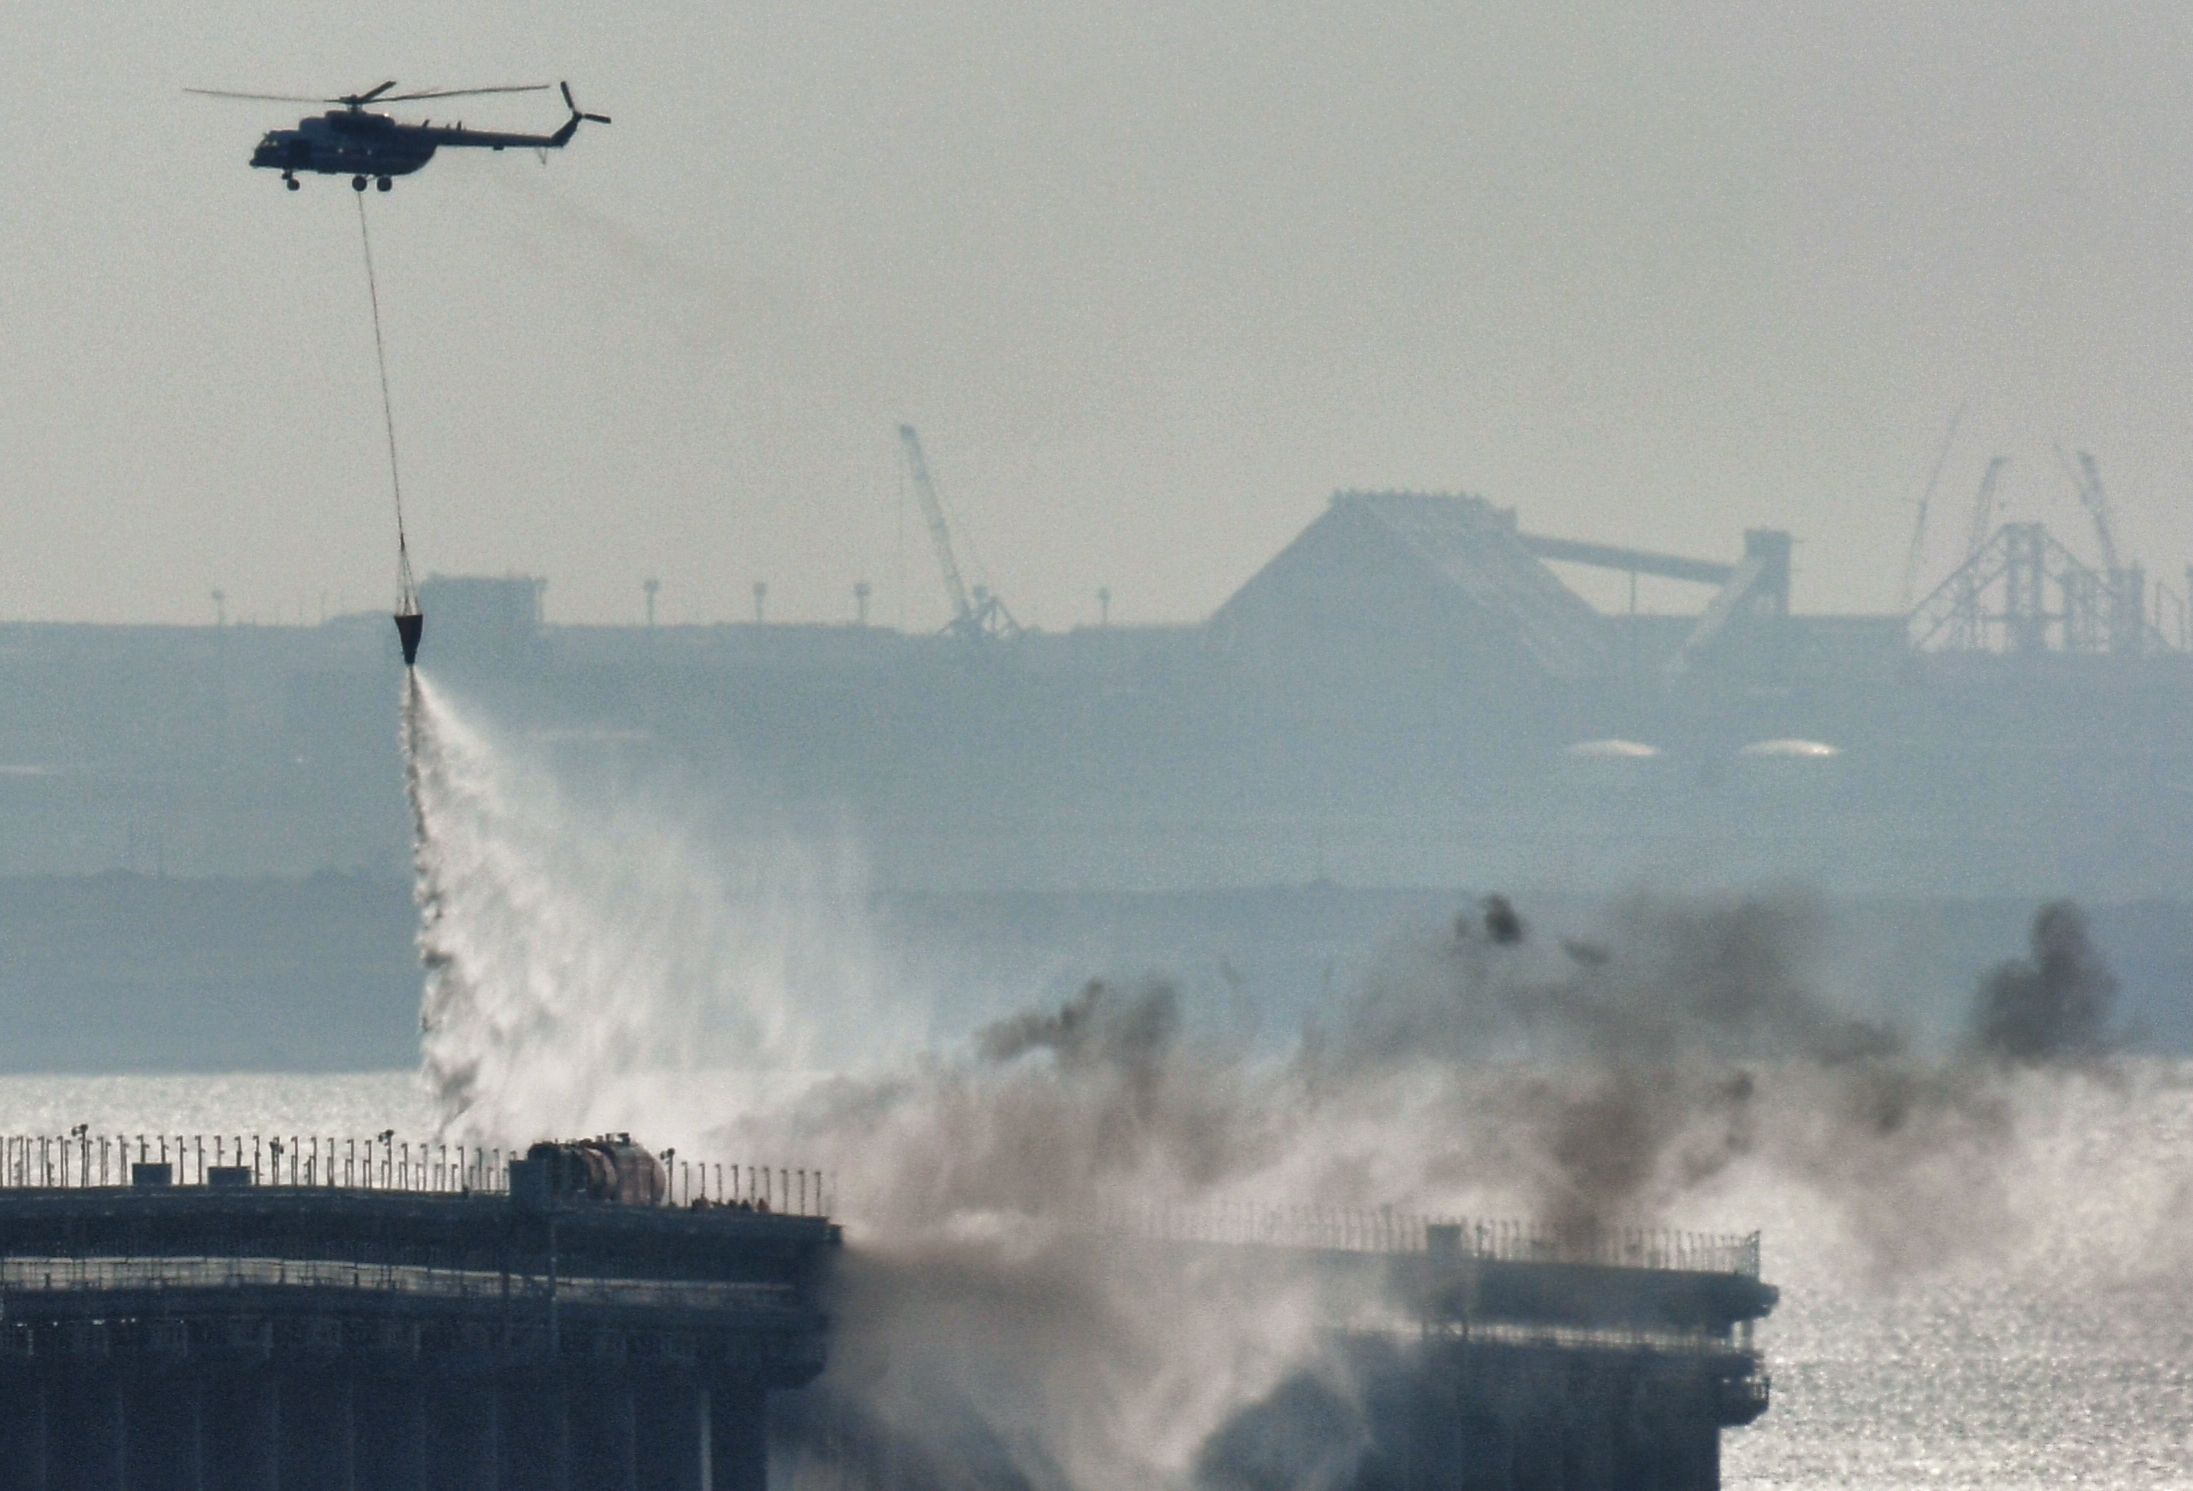 8291789 08.10.2022 A helicopter drops water to stop fire on Crimean Bridge connecting Russian mainland and Crimean peninsula over the Kerch Strait, in Crimea, Russia. Russia's National Antiterrorism Committee (NAC) said on Saturday that a truck was blown up on the Crimean Bridge, which caused an inflammation of seven fuel tanks of a railway train and a partial collapse of two car spans. The traffic and movement of trains across the Kerch Strait was temporarily suspended. The movement of ships in the Kerch Strait did not stop despite a fire on the bridge. Konstantin Mihalchevskiy / Sputnik